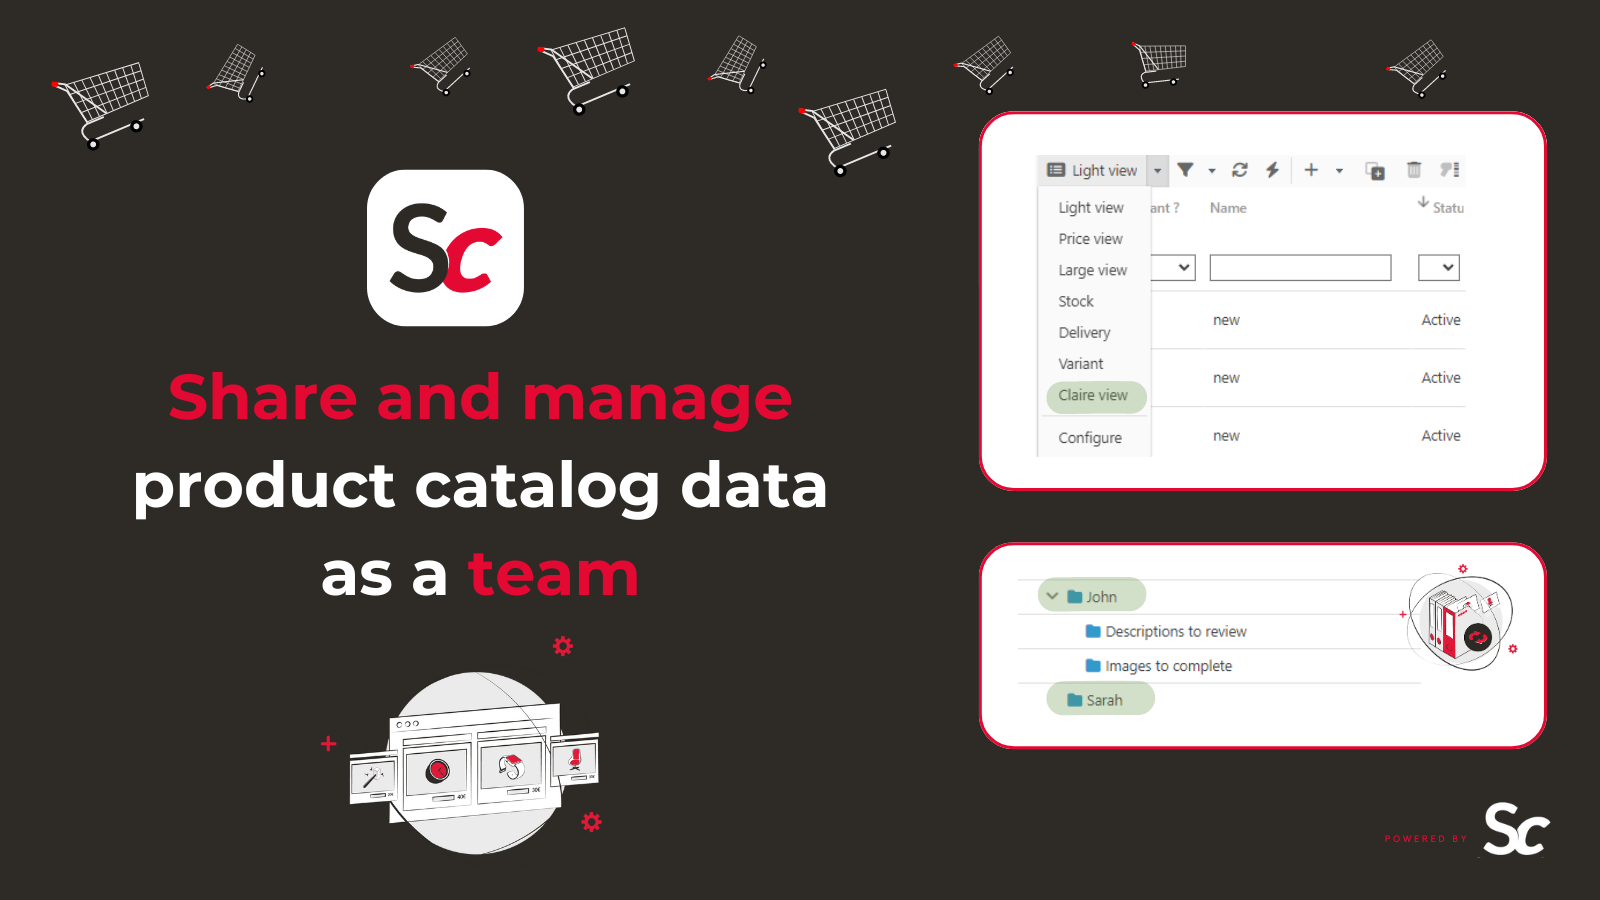 Share and manage product catalog data as a team